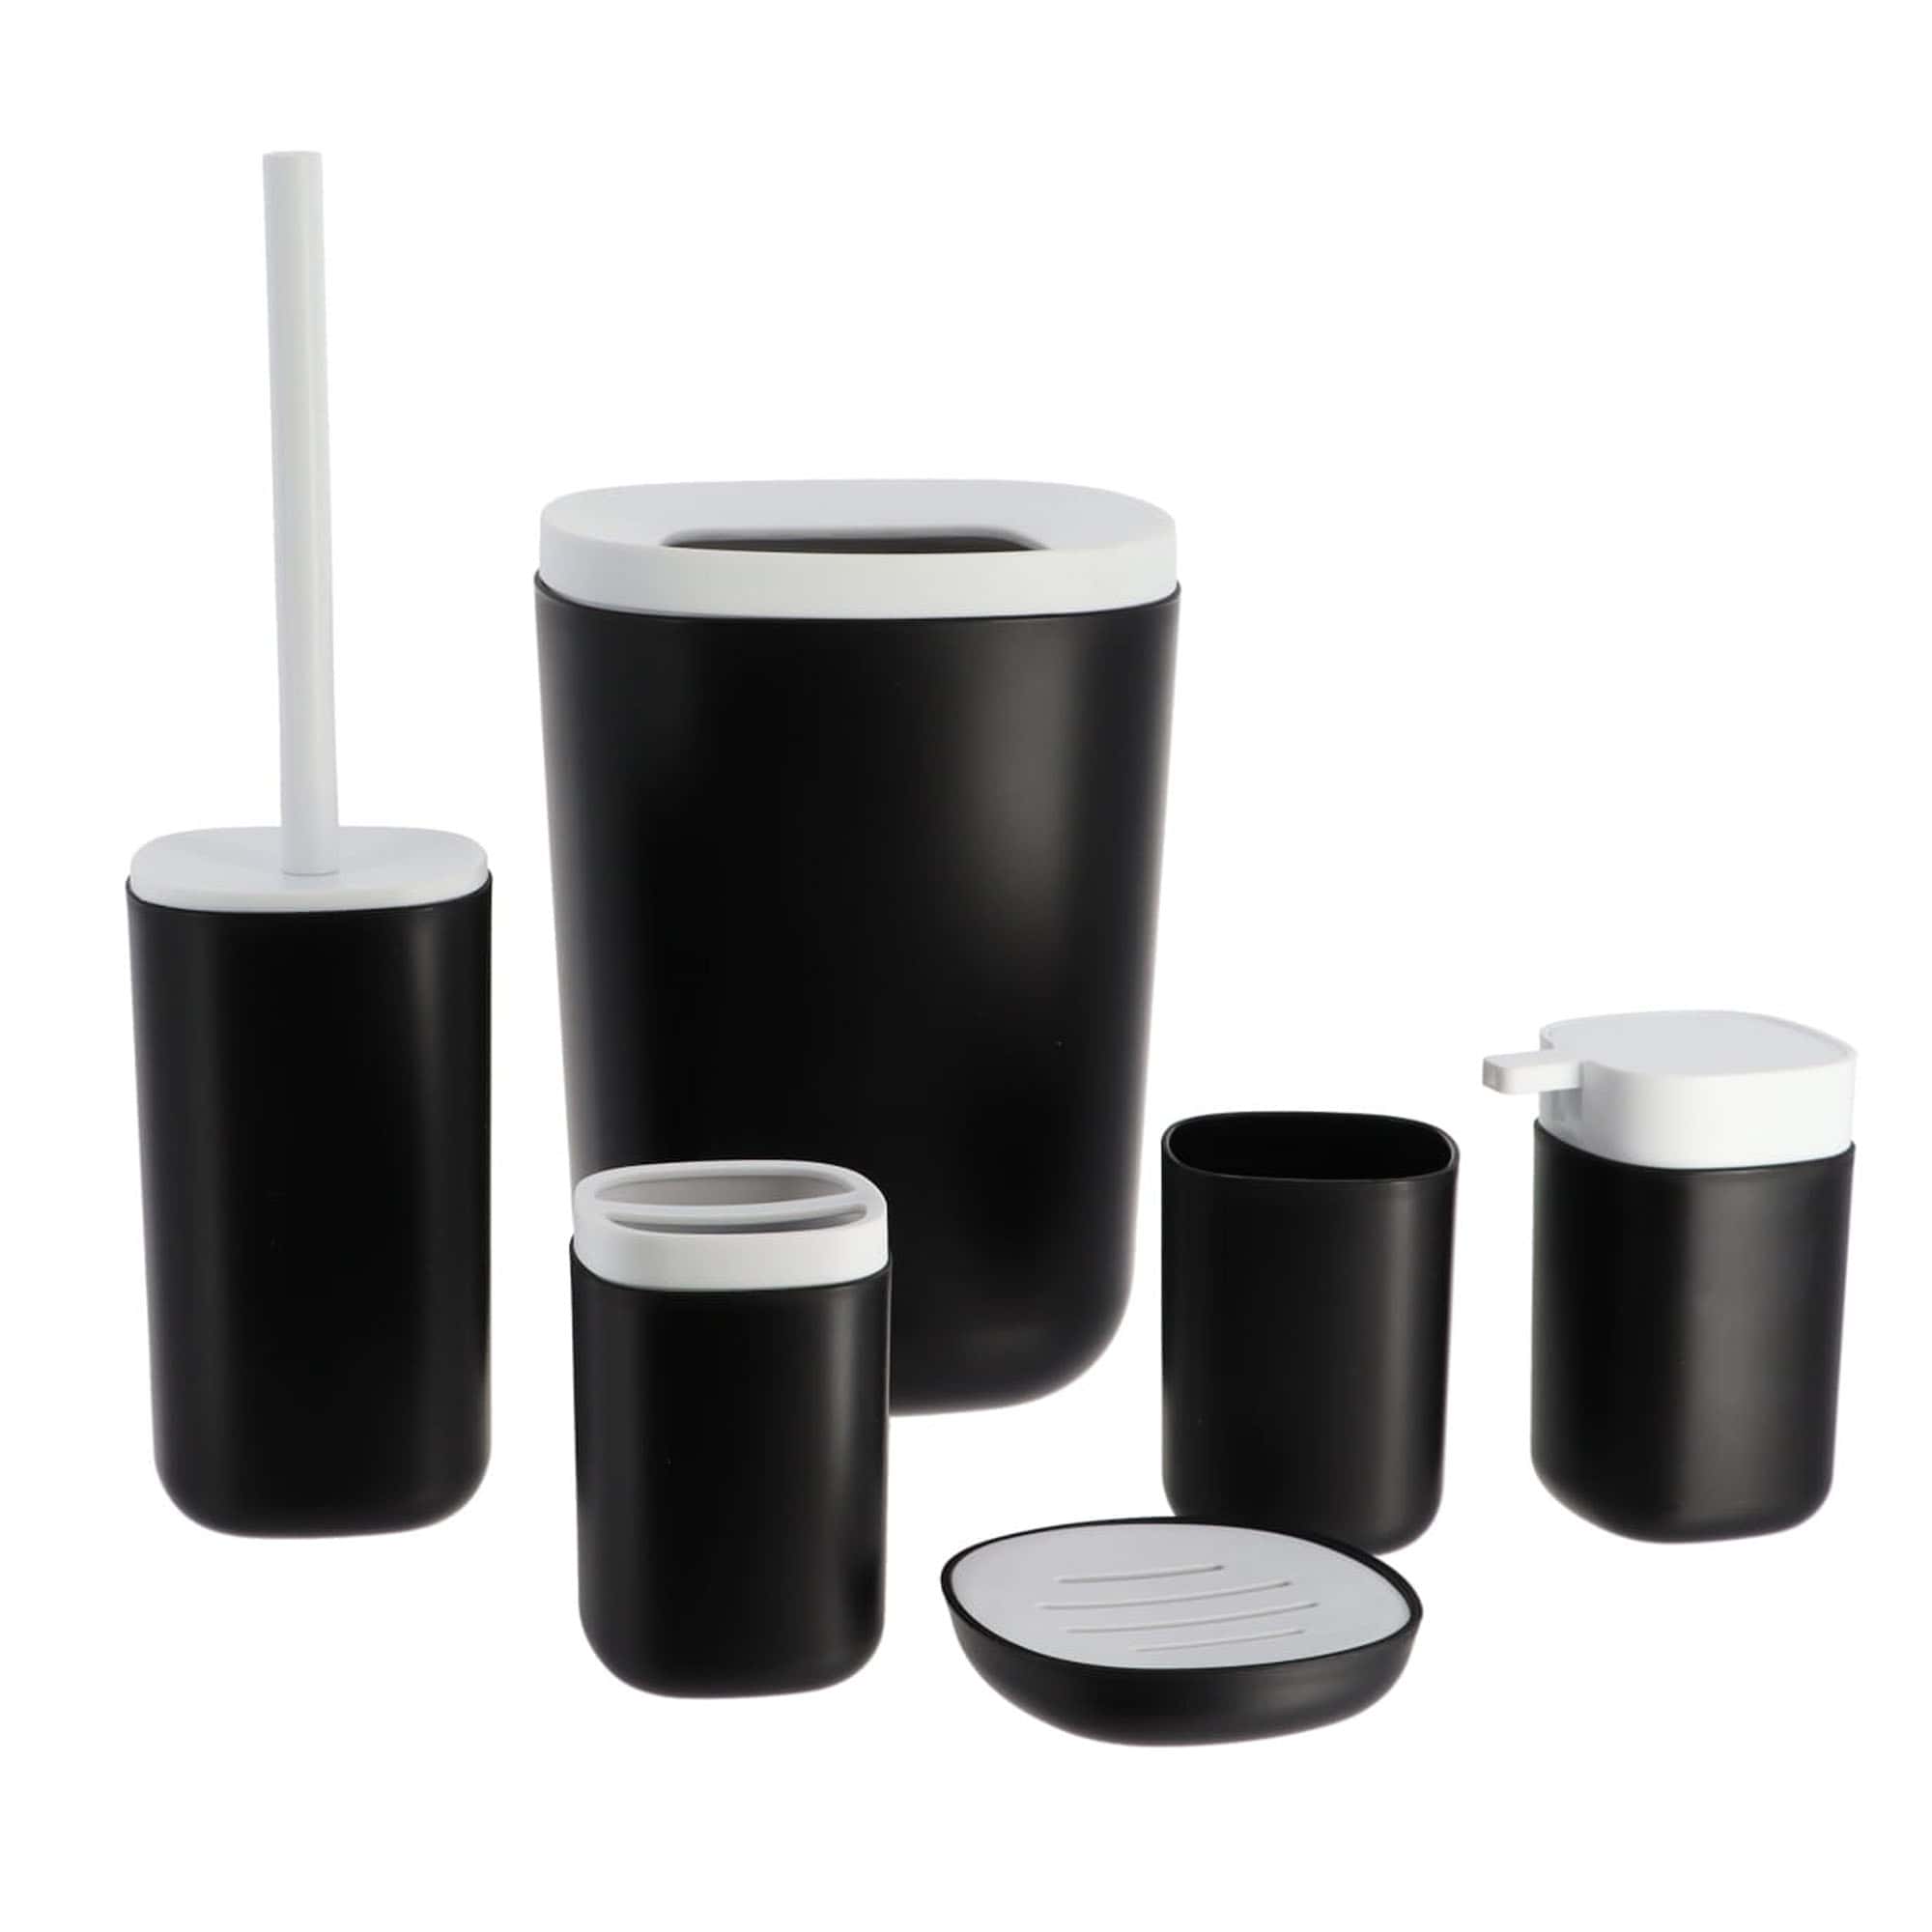 Complete bathroom accessories set in black and white with trash can, toilet brush set, toothbrush holder, tumbler, soap cup, liquid soap pump